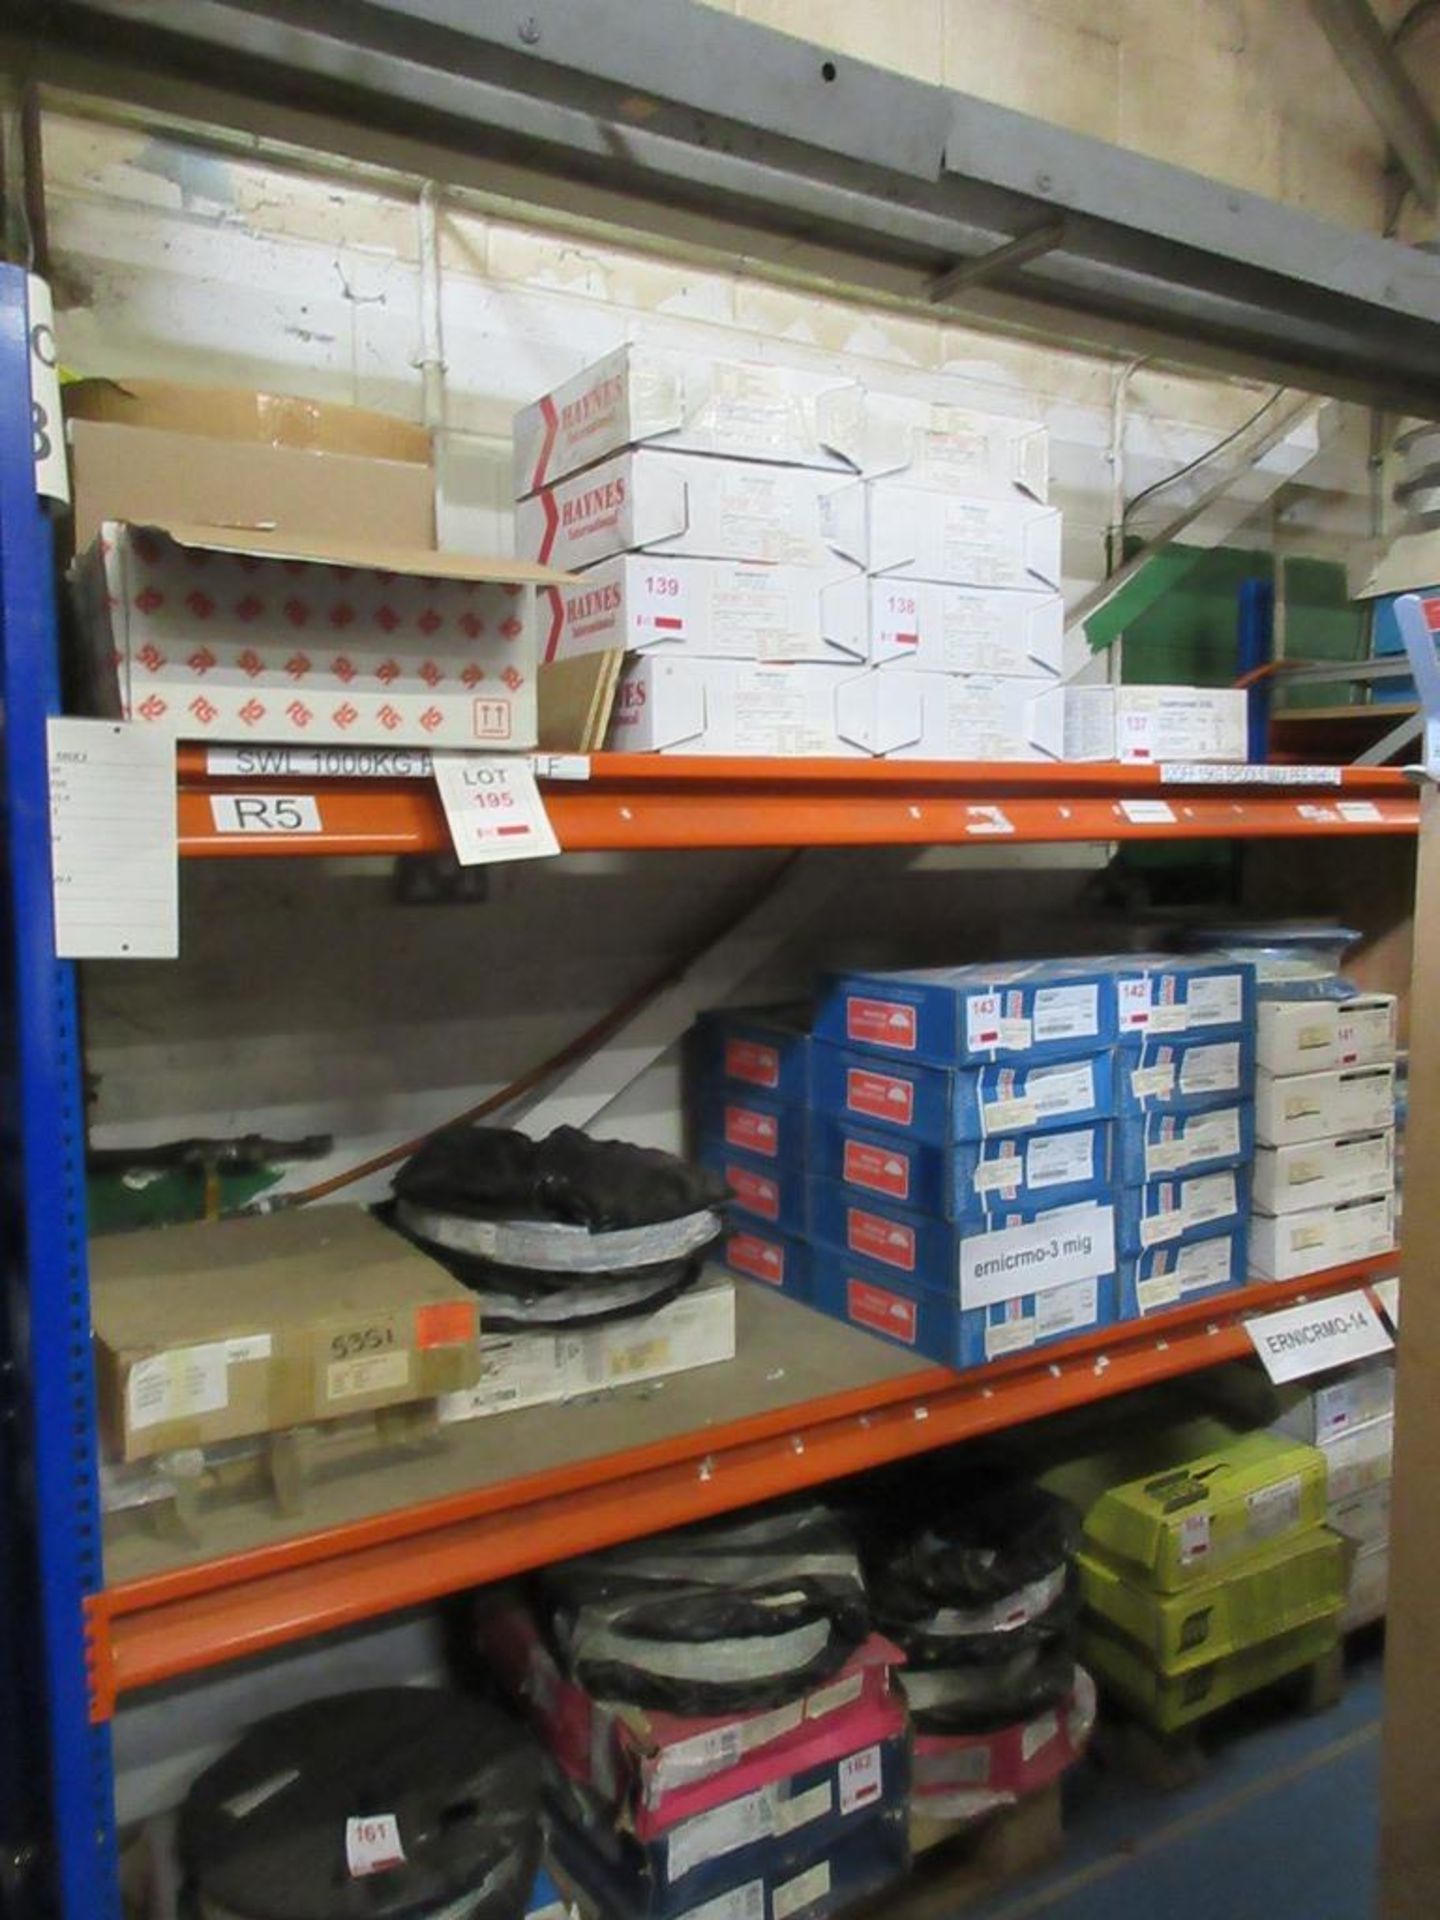 Six bays of adjustable boltless racking, approx. size 2.4m x 600mm x 2m - excluding contents - Image 2 of 5